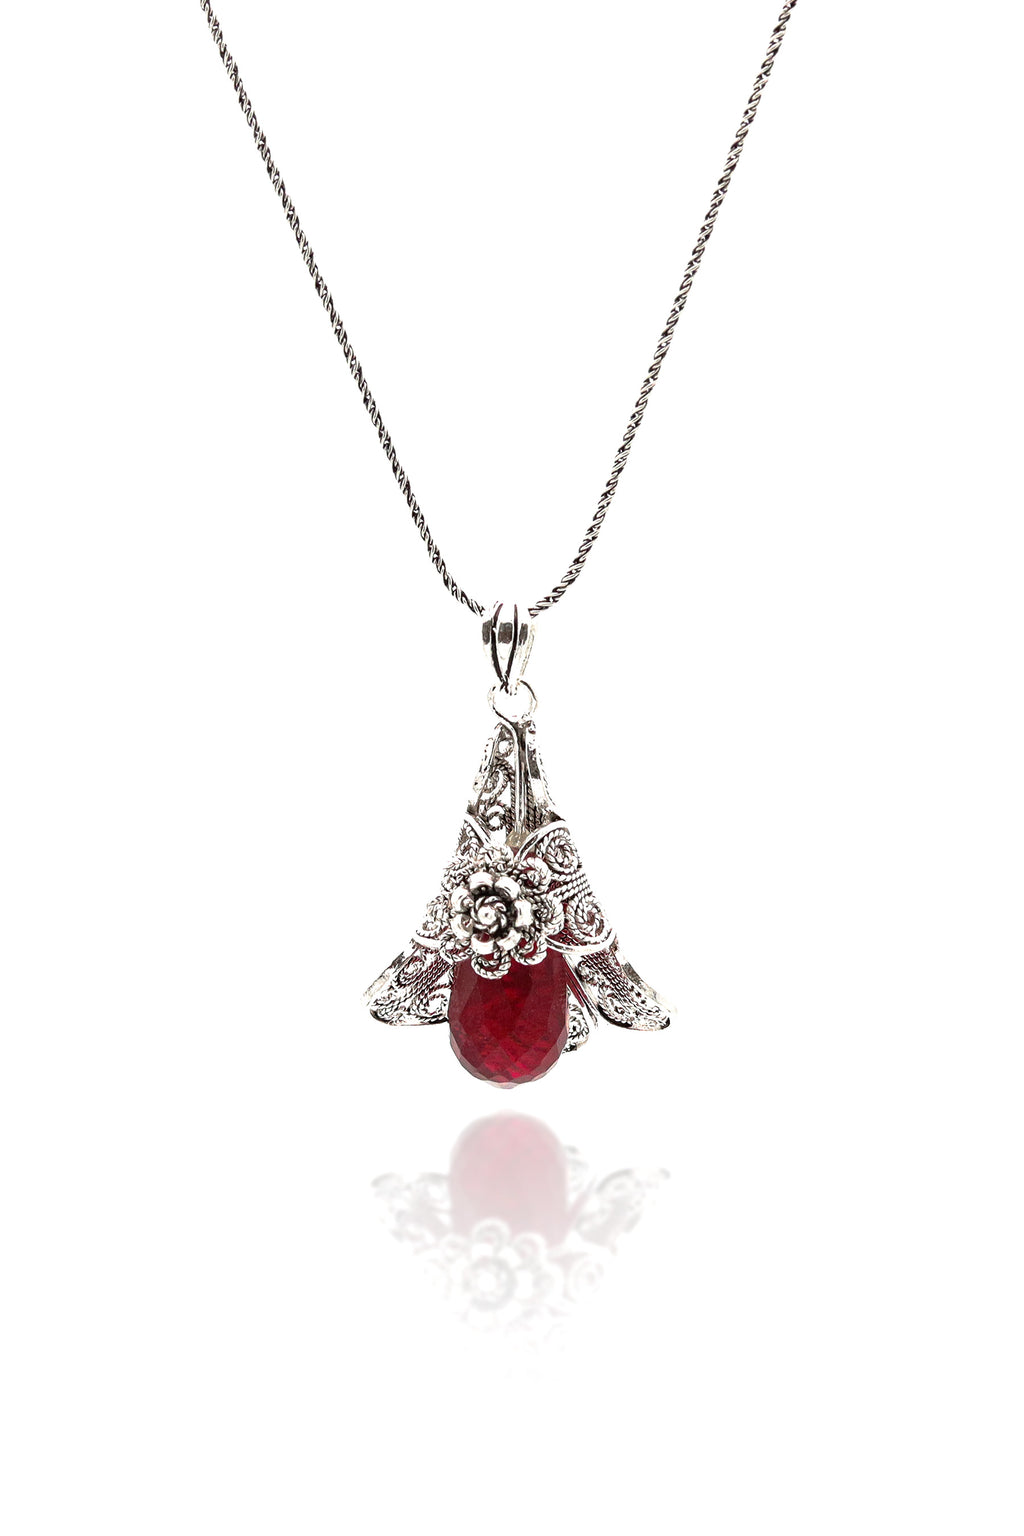 Lily Model Authentic Filigree Silver Necklace With Ruby (NG201019394)